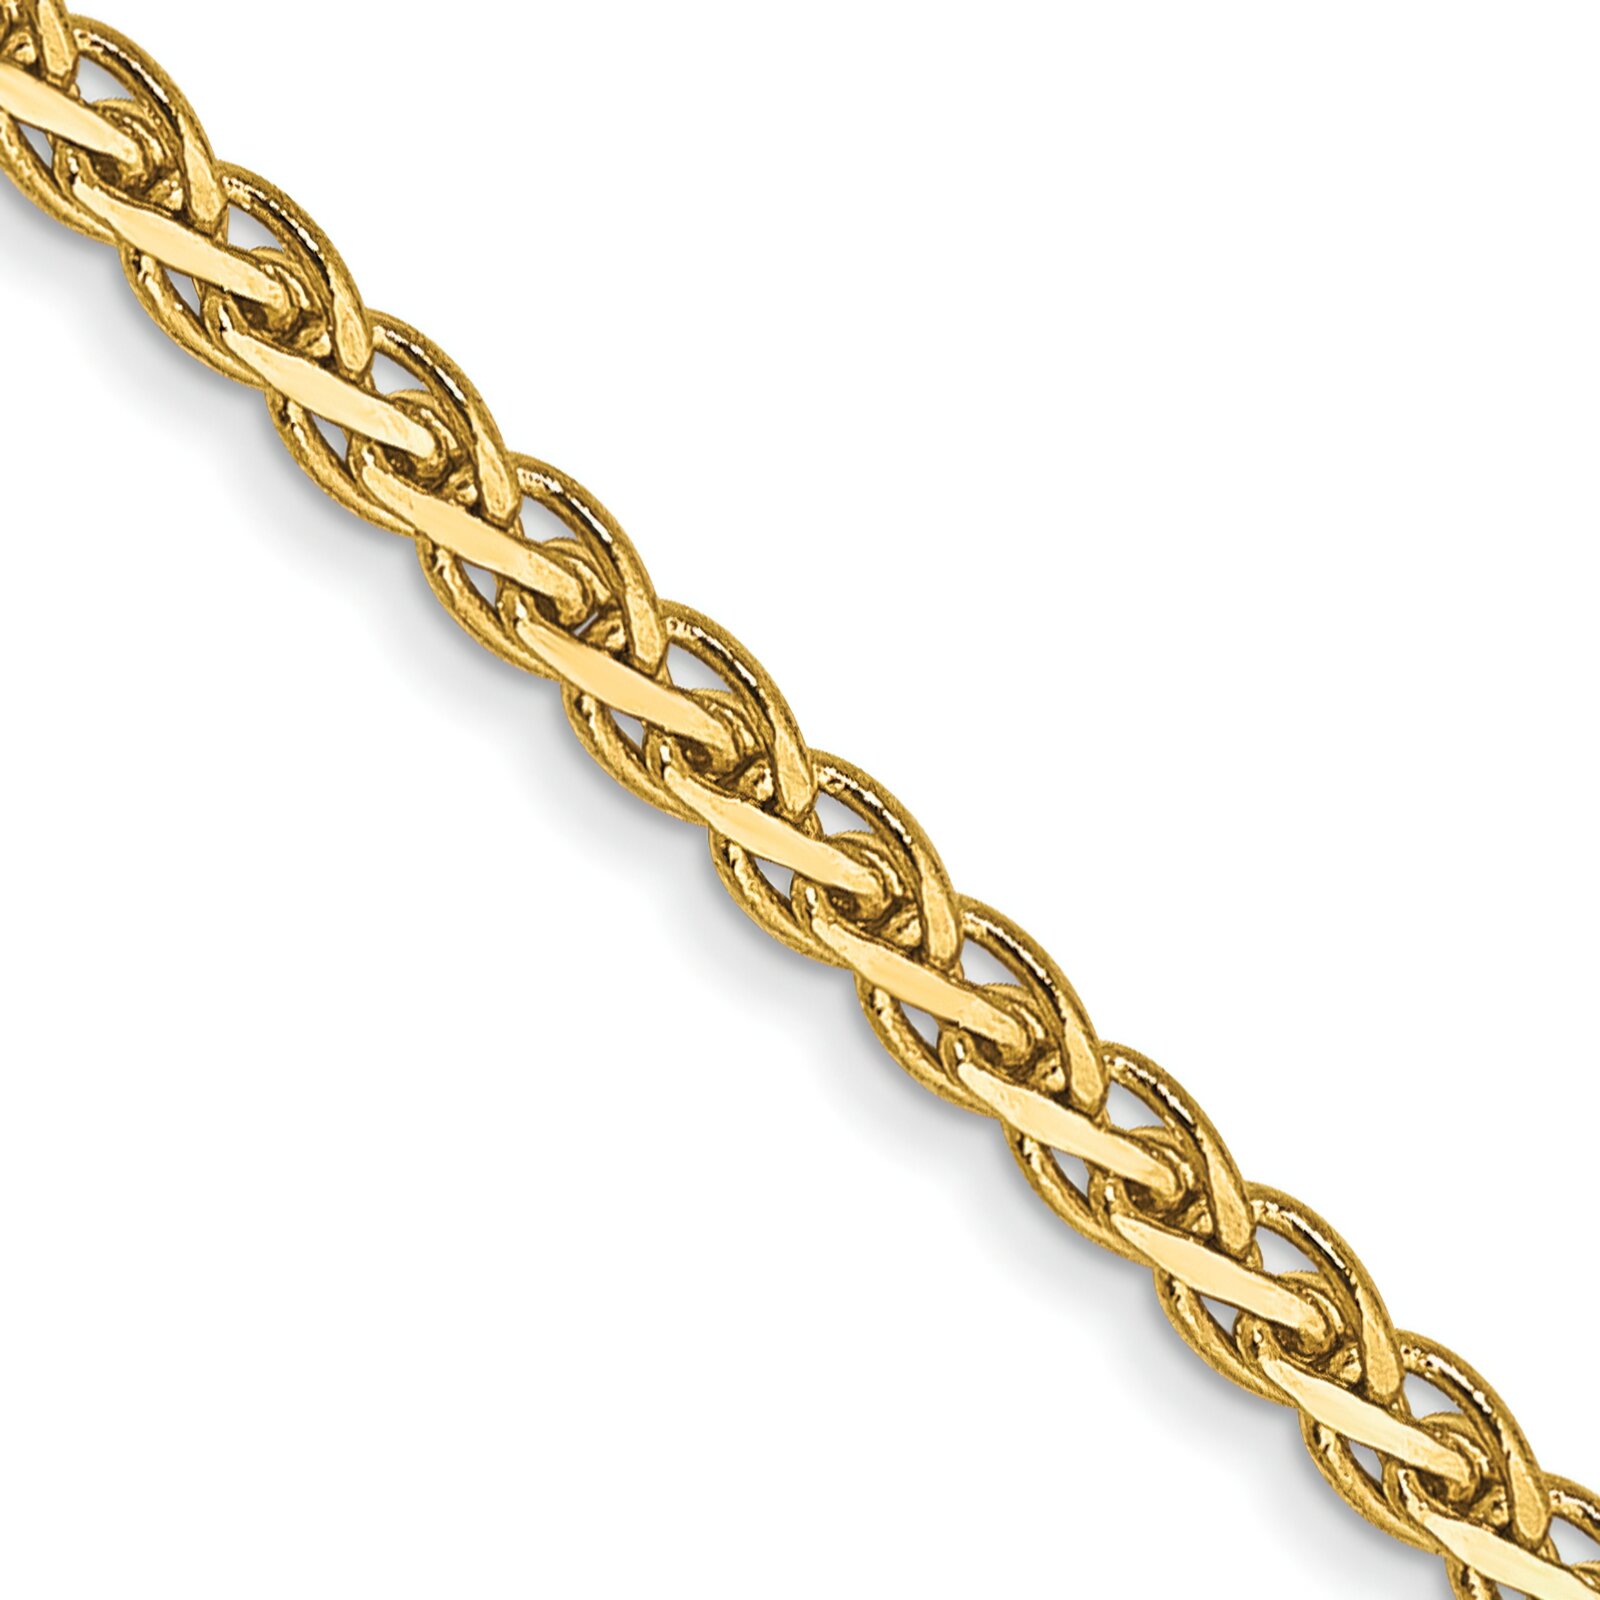 Findingking 14K Gold 1.8mm Flat Wheat Chain Necklace Jewelry 18"